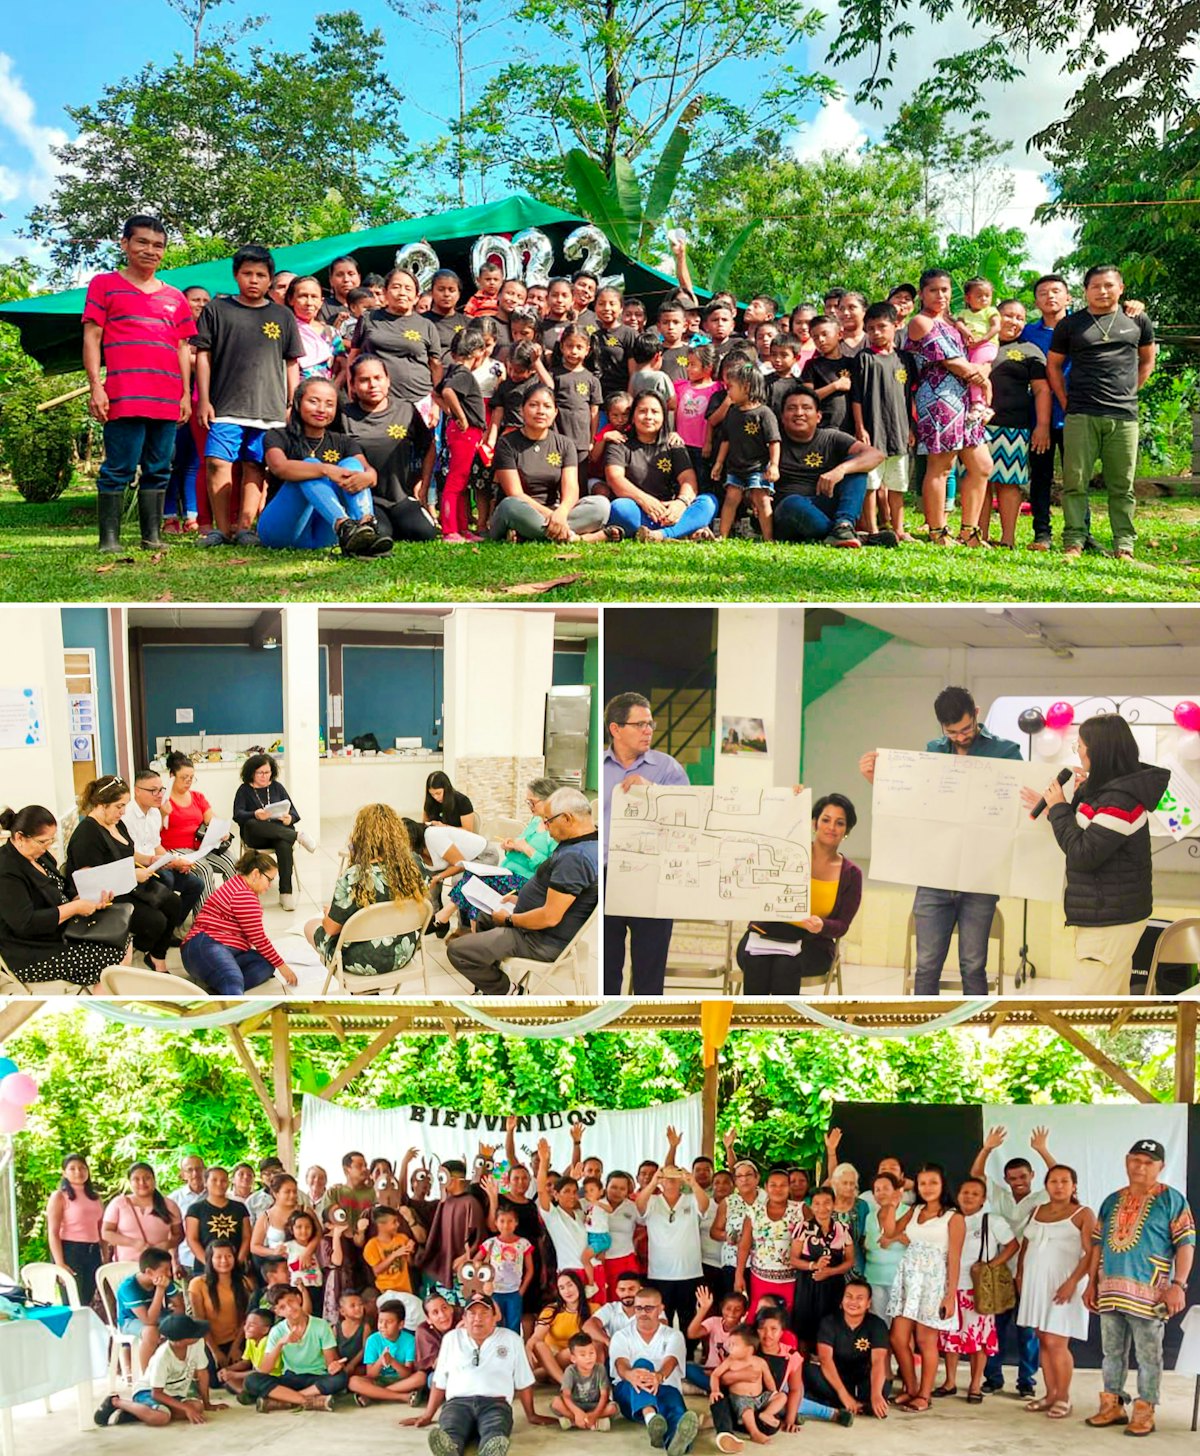 Pictured here is a sampling of the conferences that have been held throughout Costa Rica.